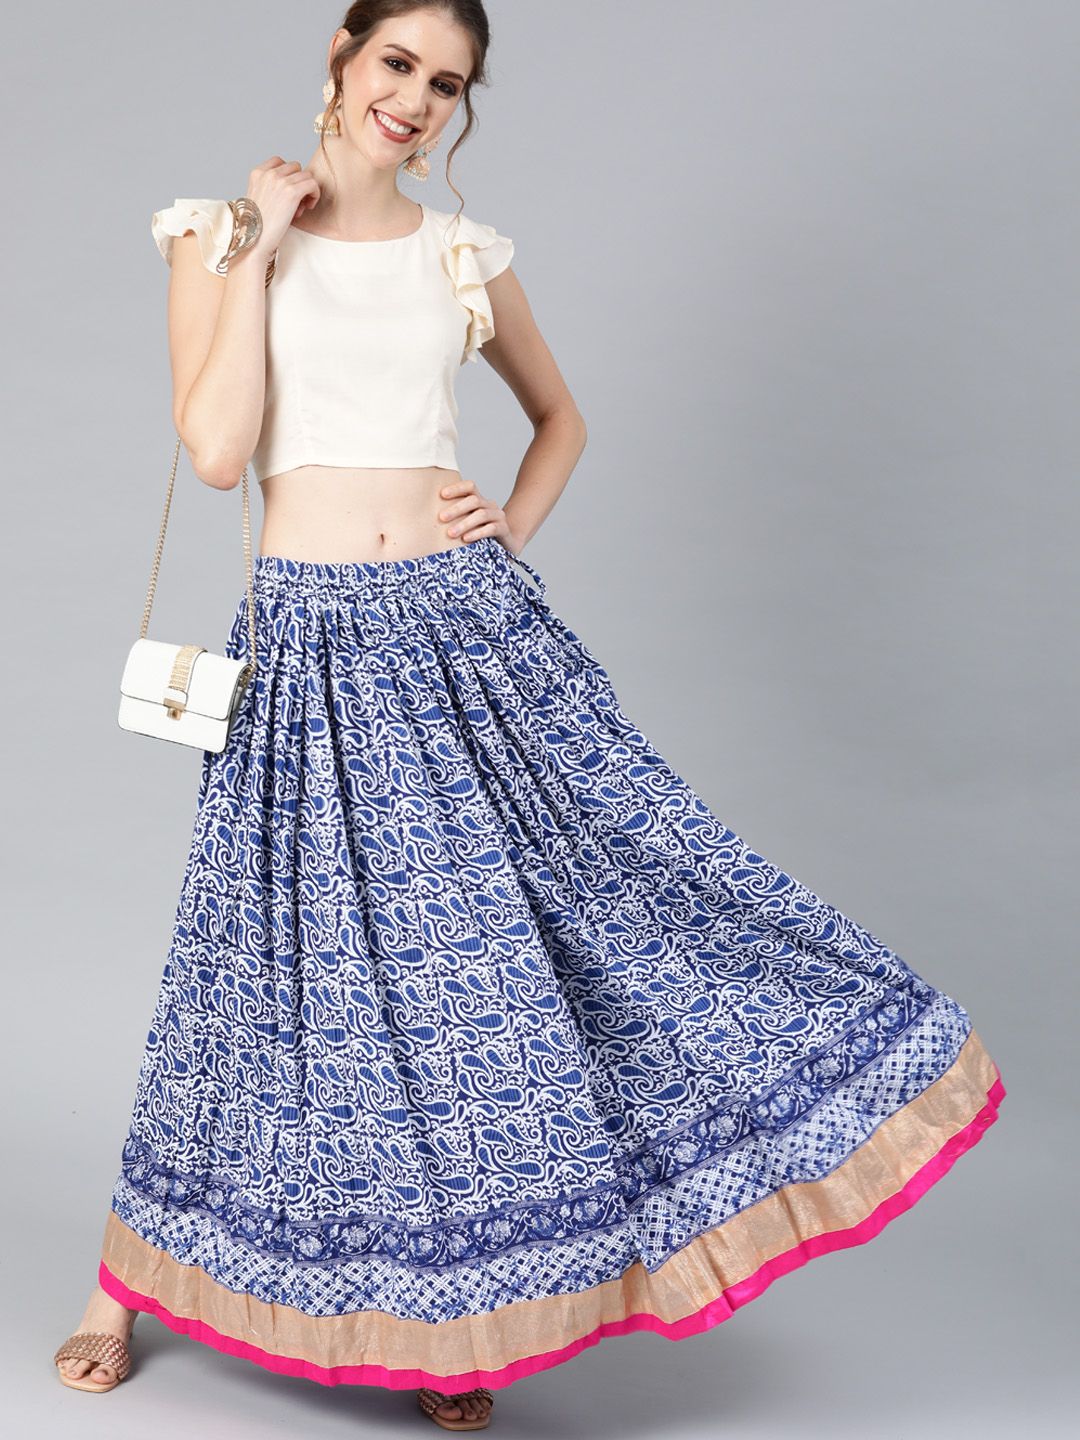 Geroo Jaipur Blue Hand Block Printed Pure Cotton Skirt with White Crop Top Price in India